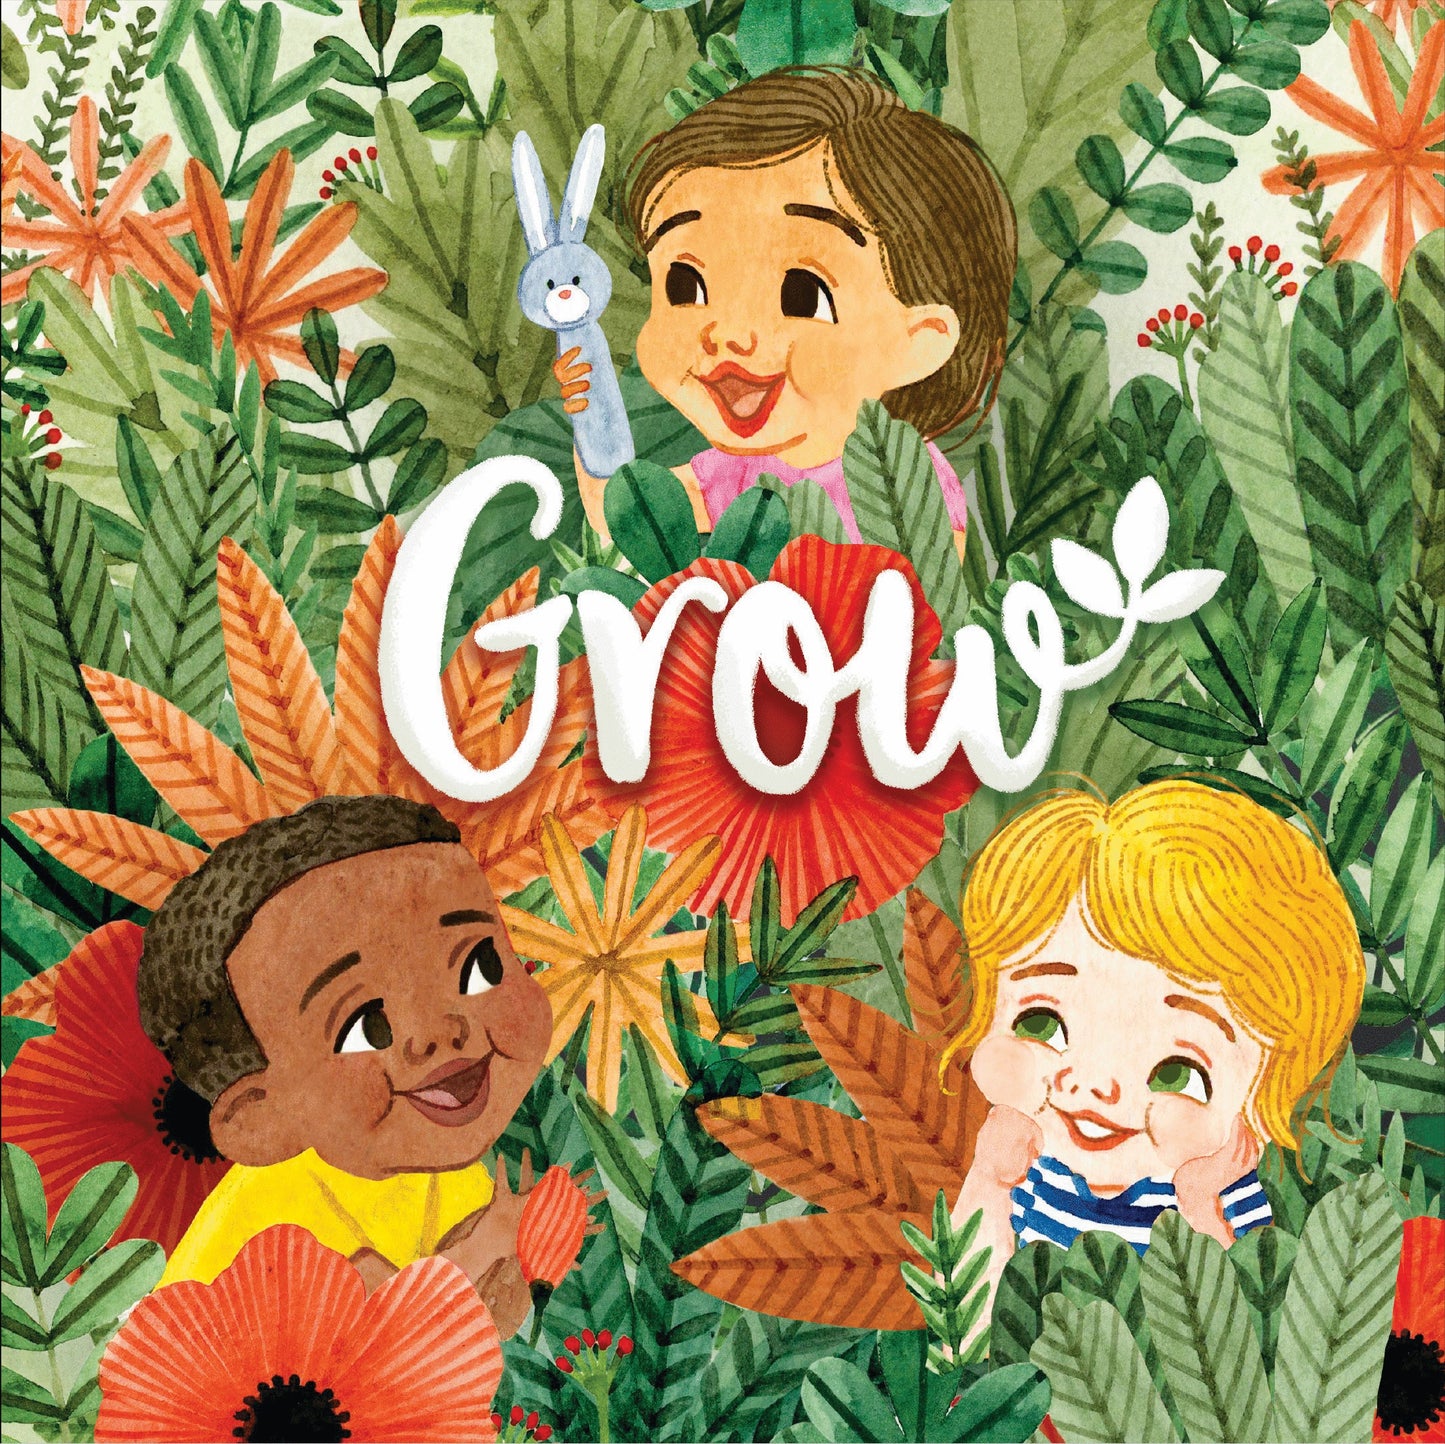 Grow by Houghton Marcourt